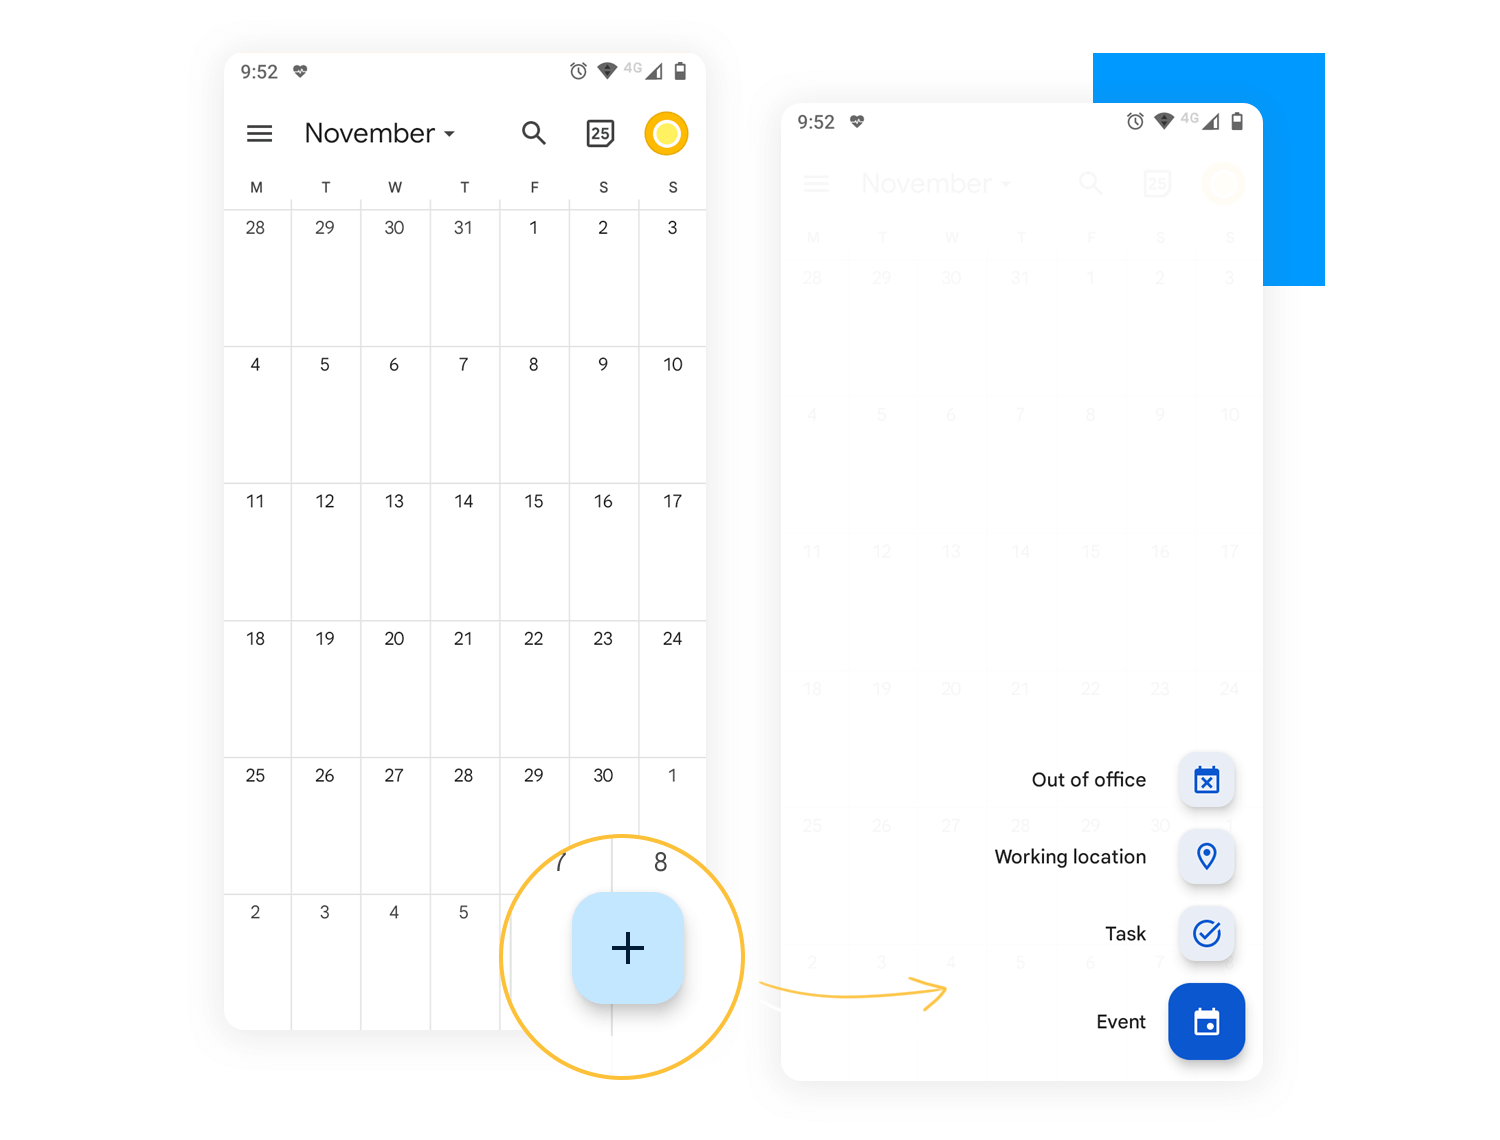 A calendar app interface showing a monthly view and a floating action button for adding out-of-office, working location, tasks, or events